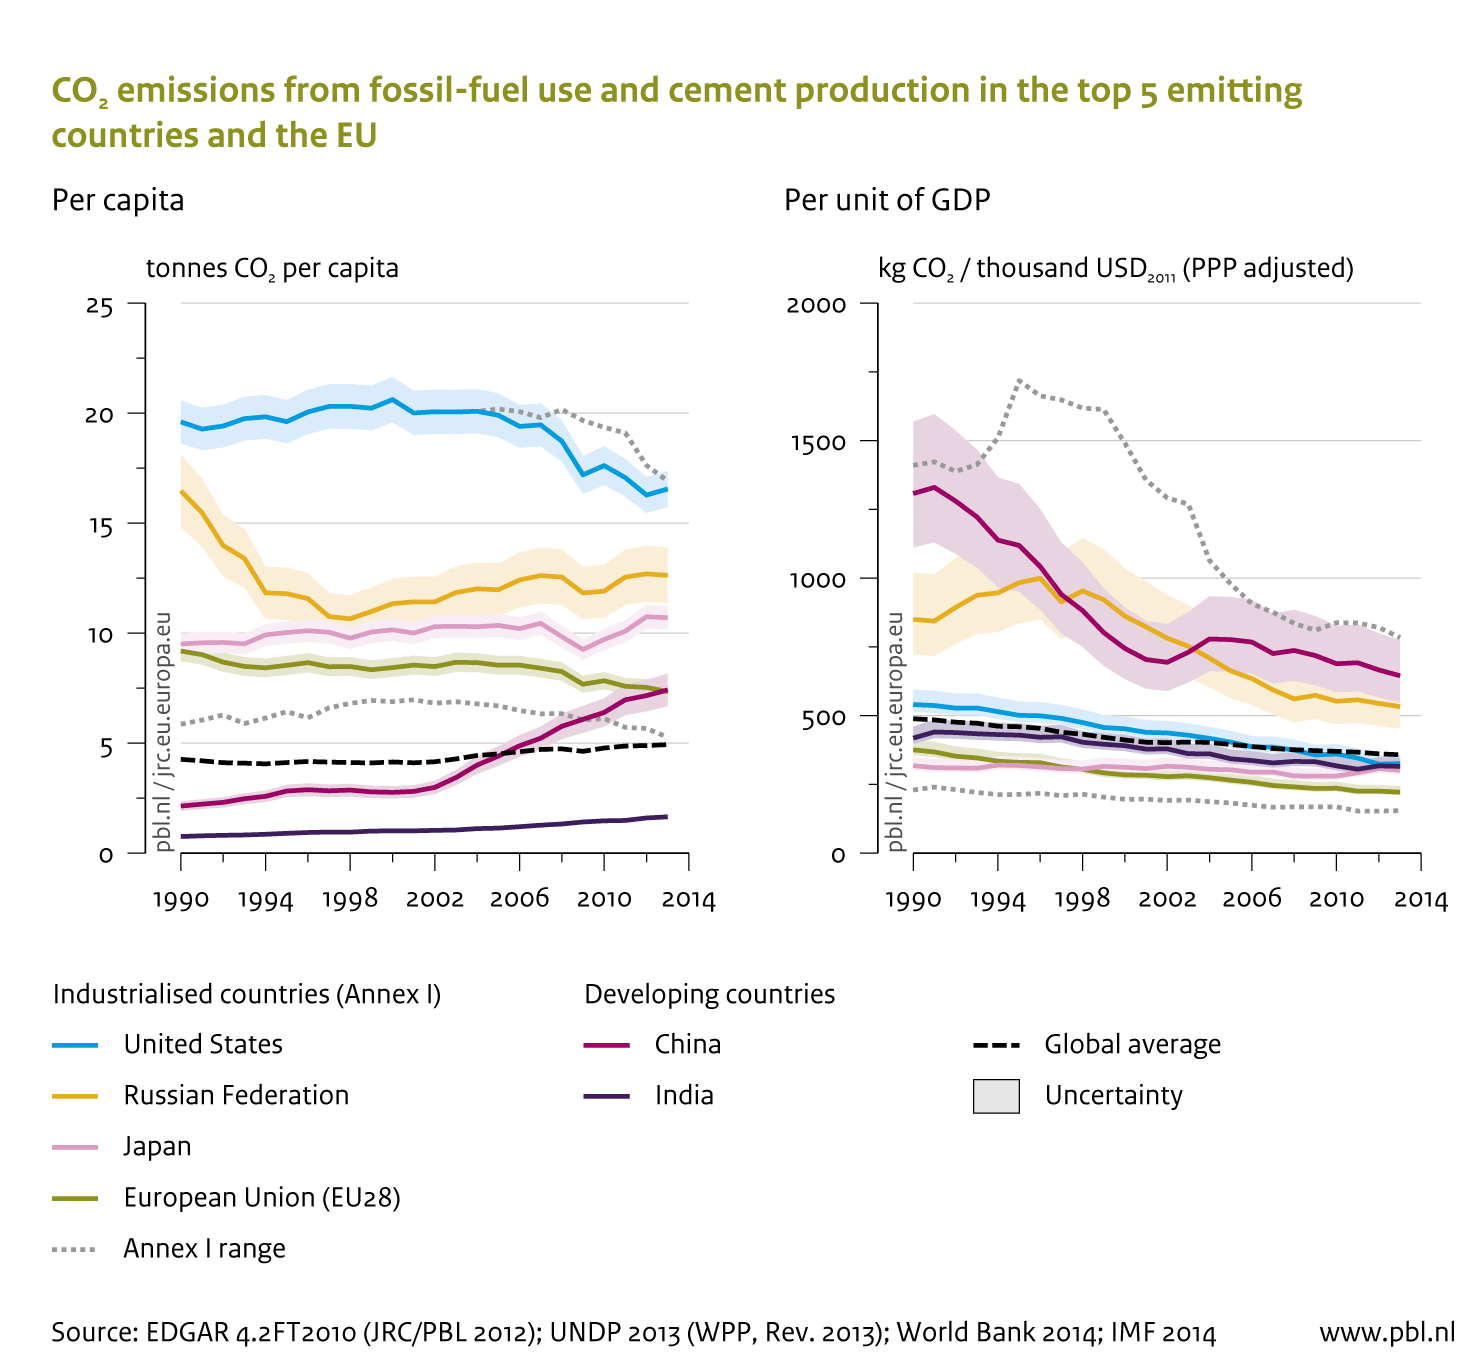 CO2 emissions per capita and unit of GDP from fossil-fuel use and cement production for industrialised and developing countries.